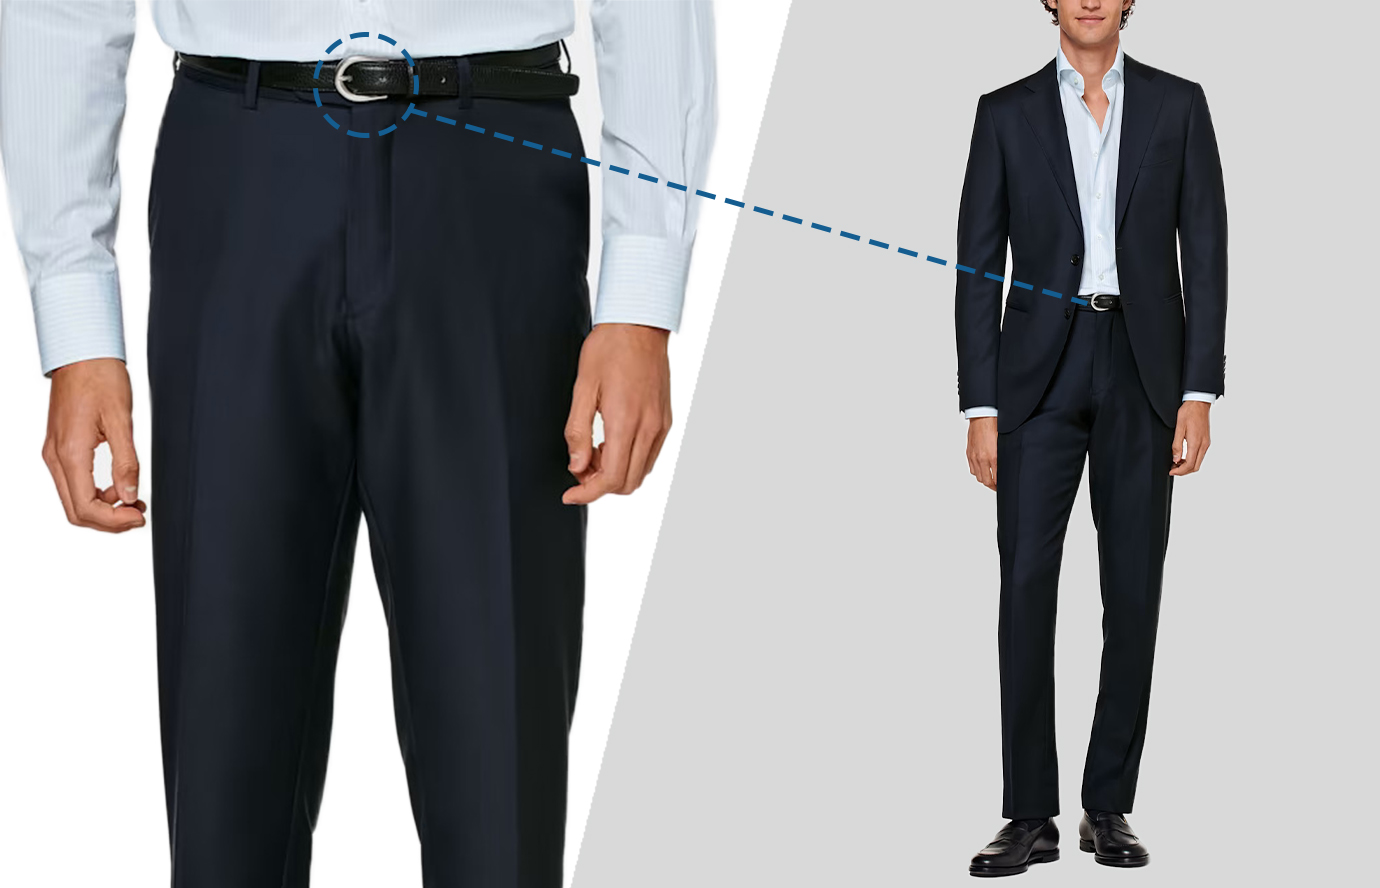 7 Tips for Wearing a Belt with a Suit - Suits Expert